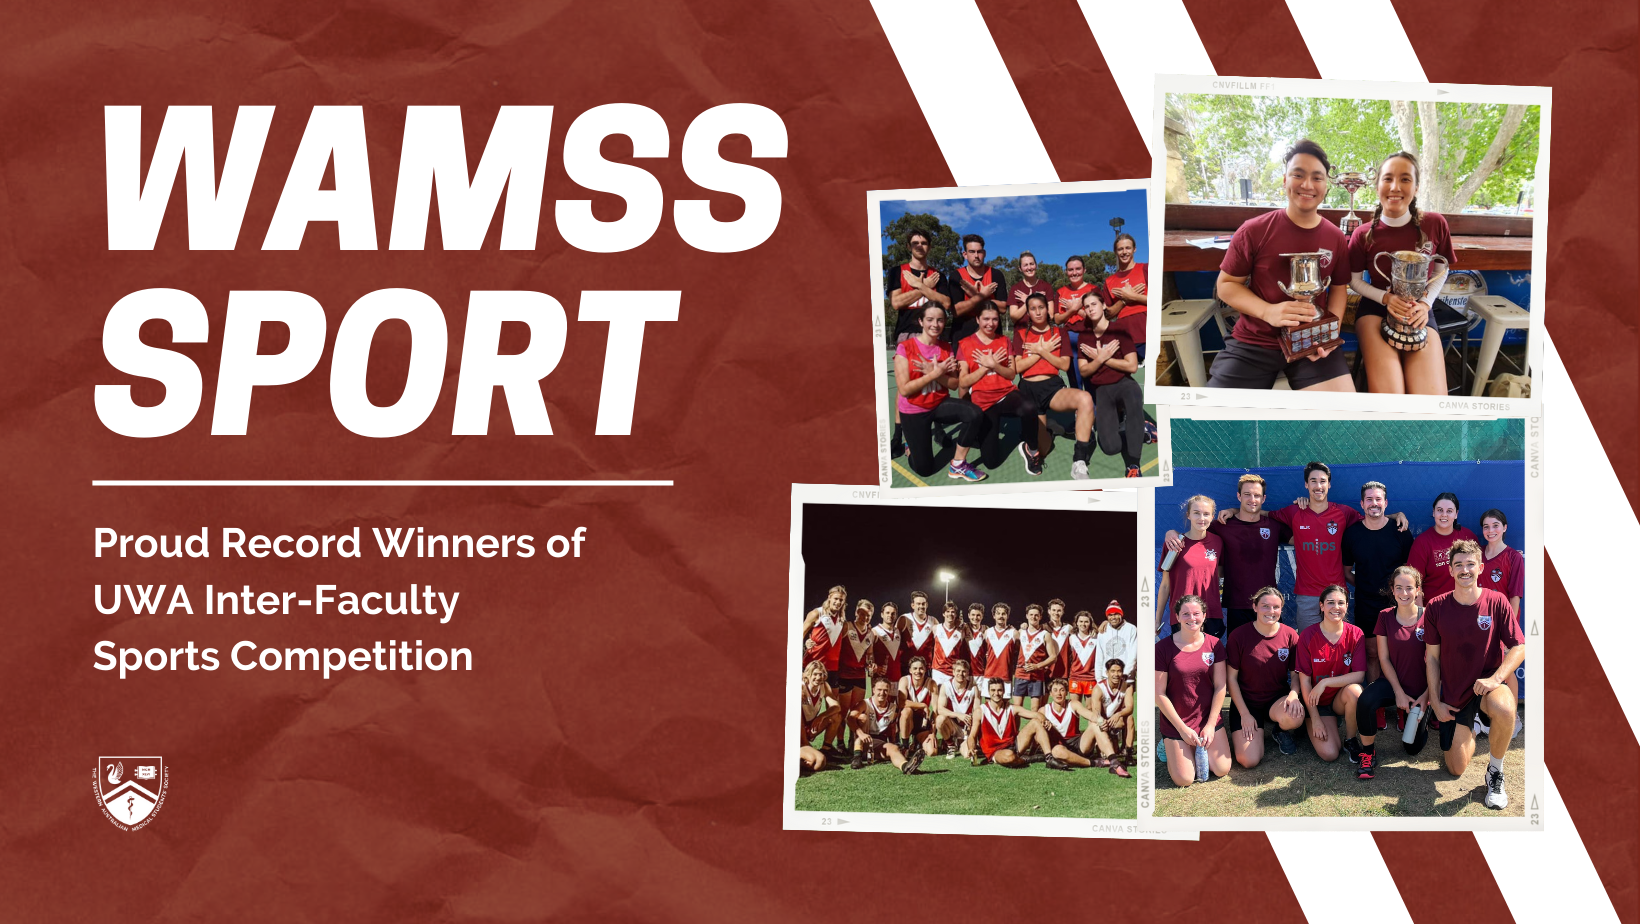 WAMSS Sport - Proud Record Winners of UWA Inter-Faculty Sports Competition